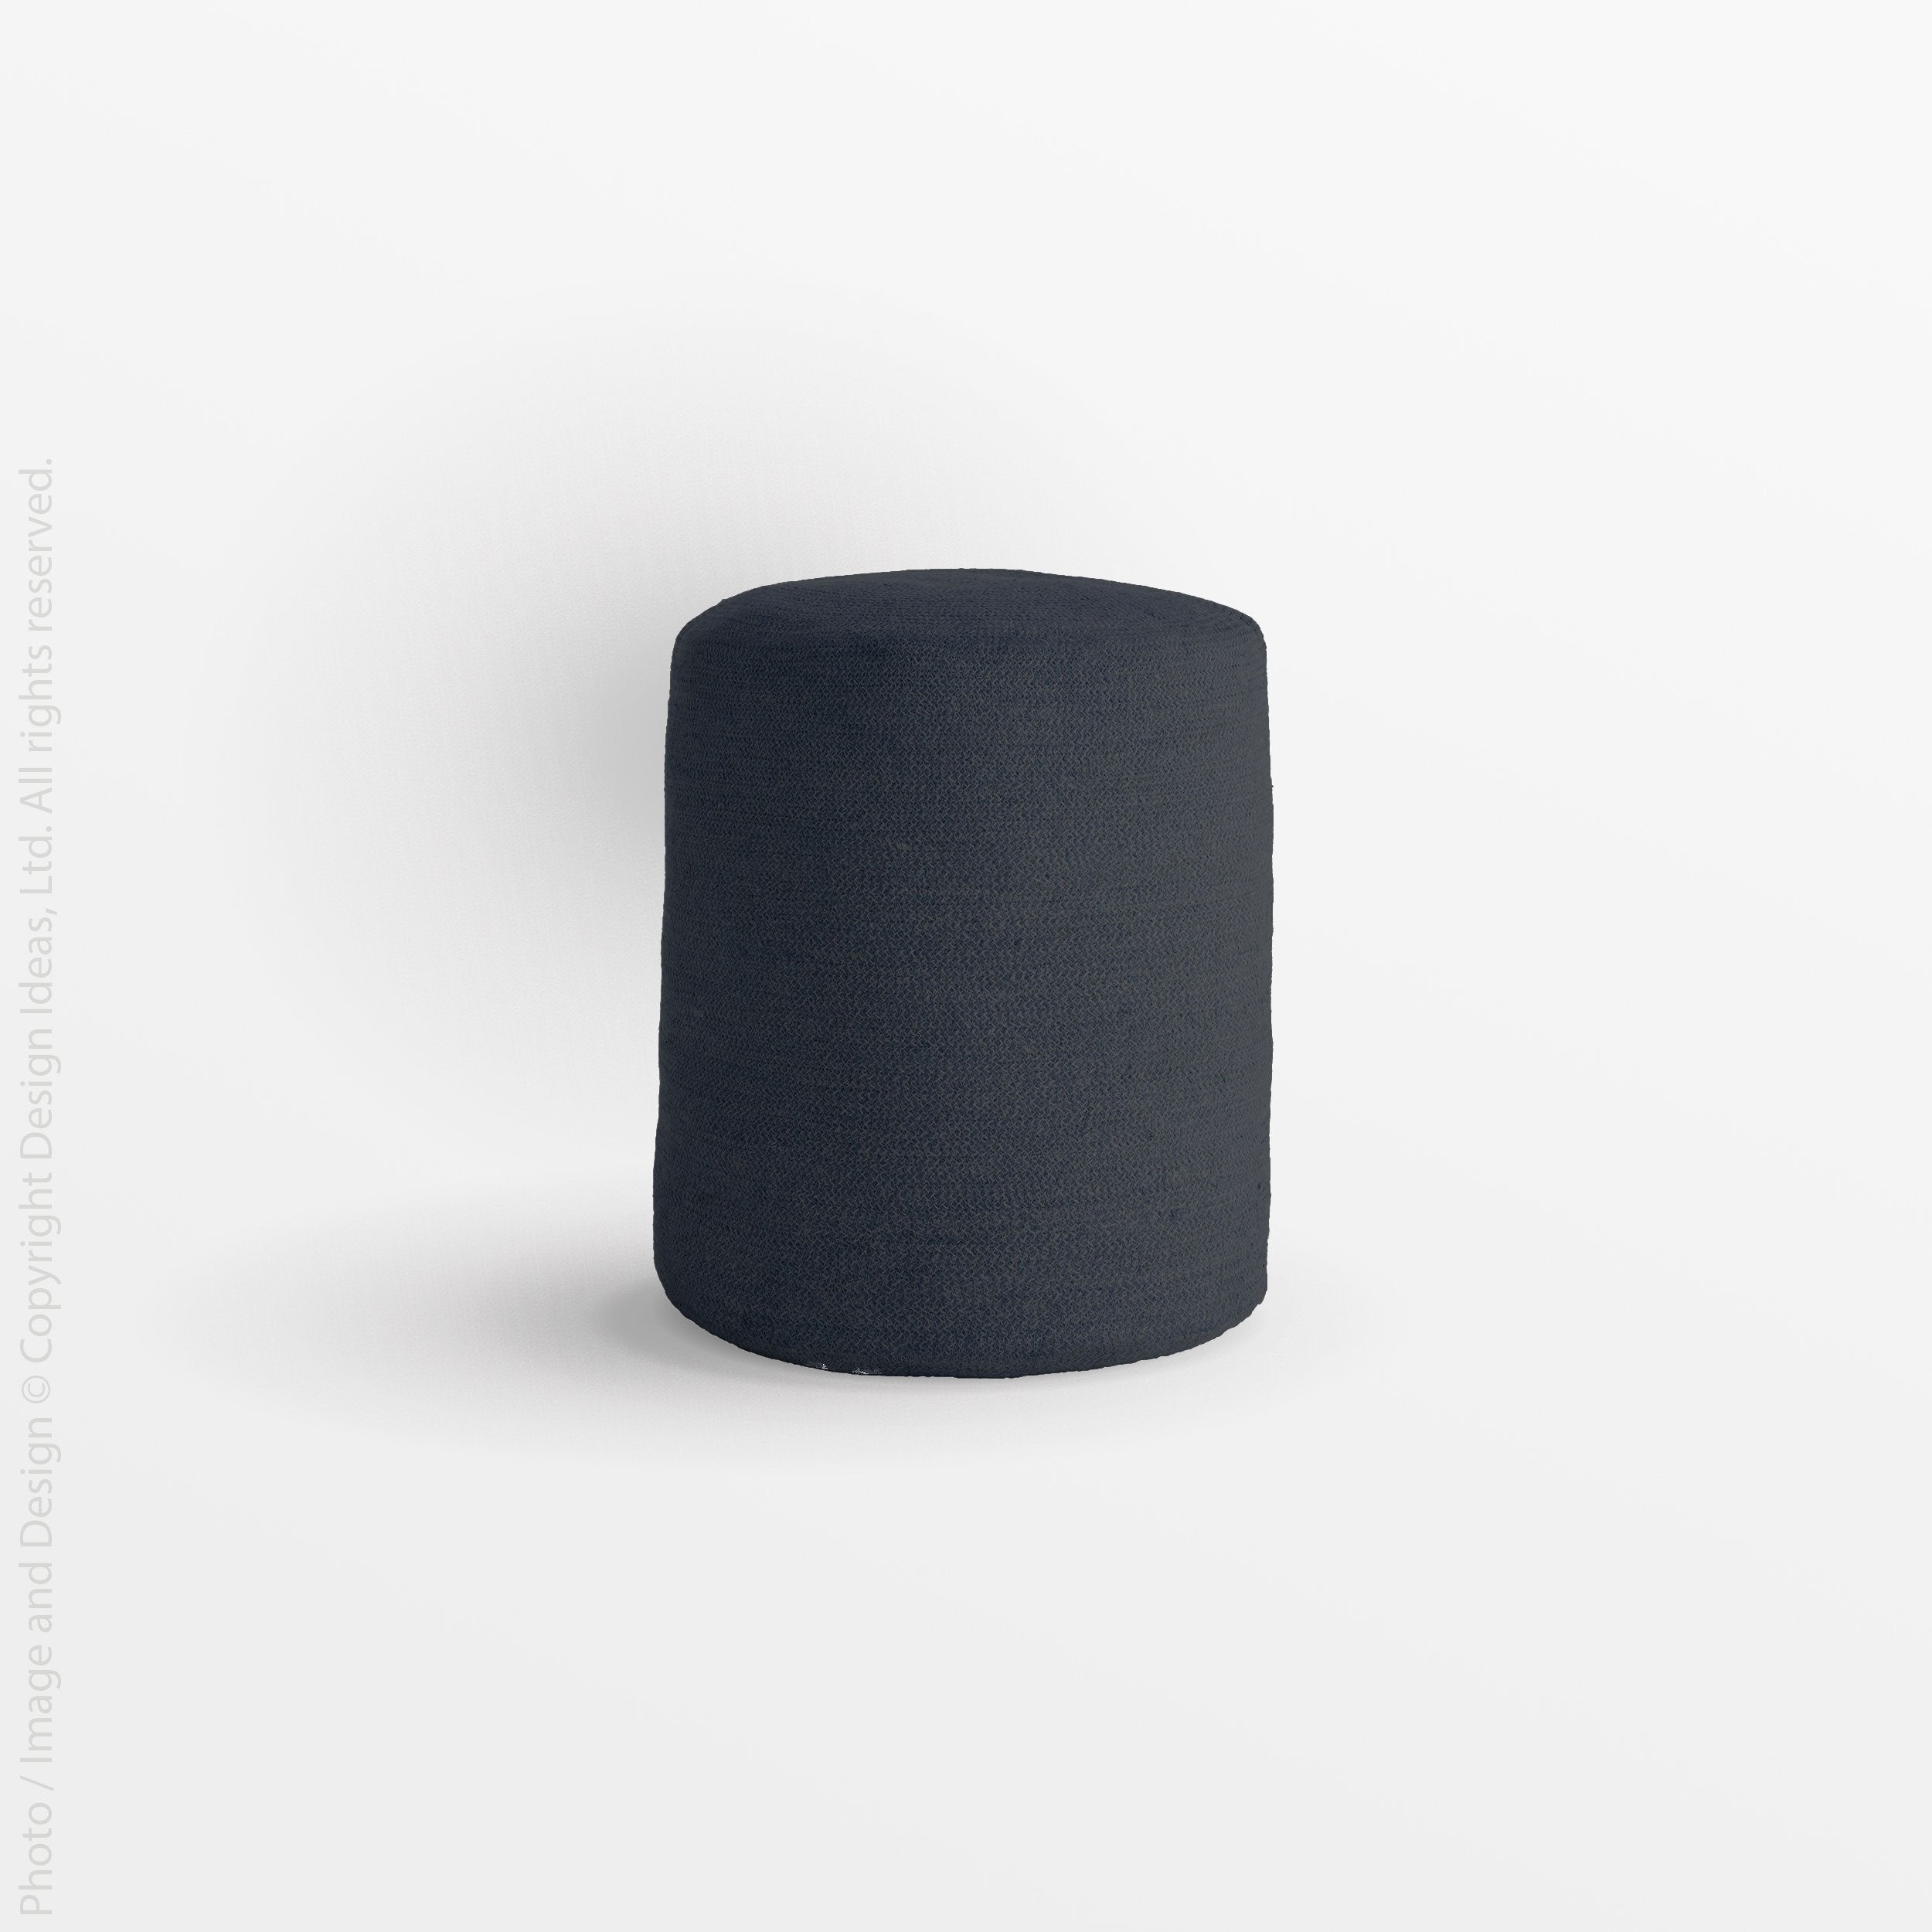 Melia™ pouf (narrow) - Black | Image 3 | Premium Ottoman from the Melia collection | made with Jute for long lasting use | texxture